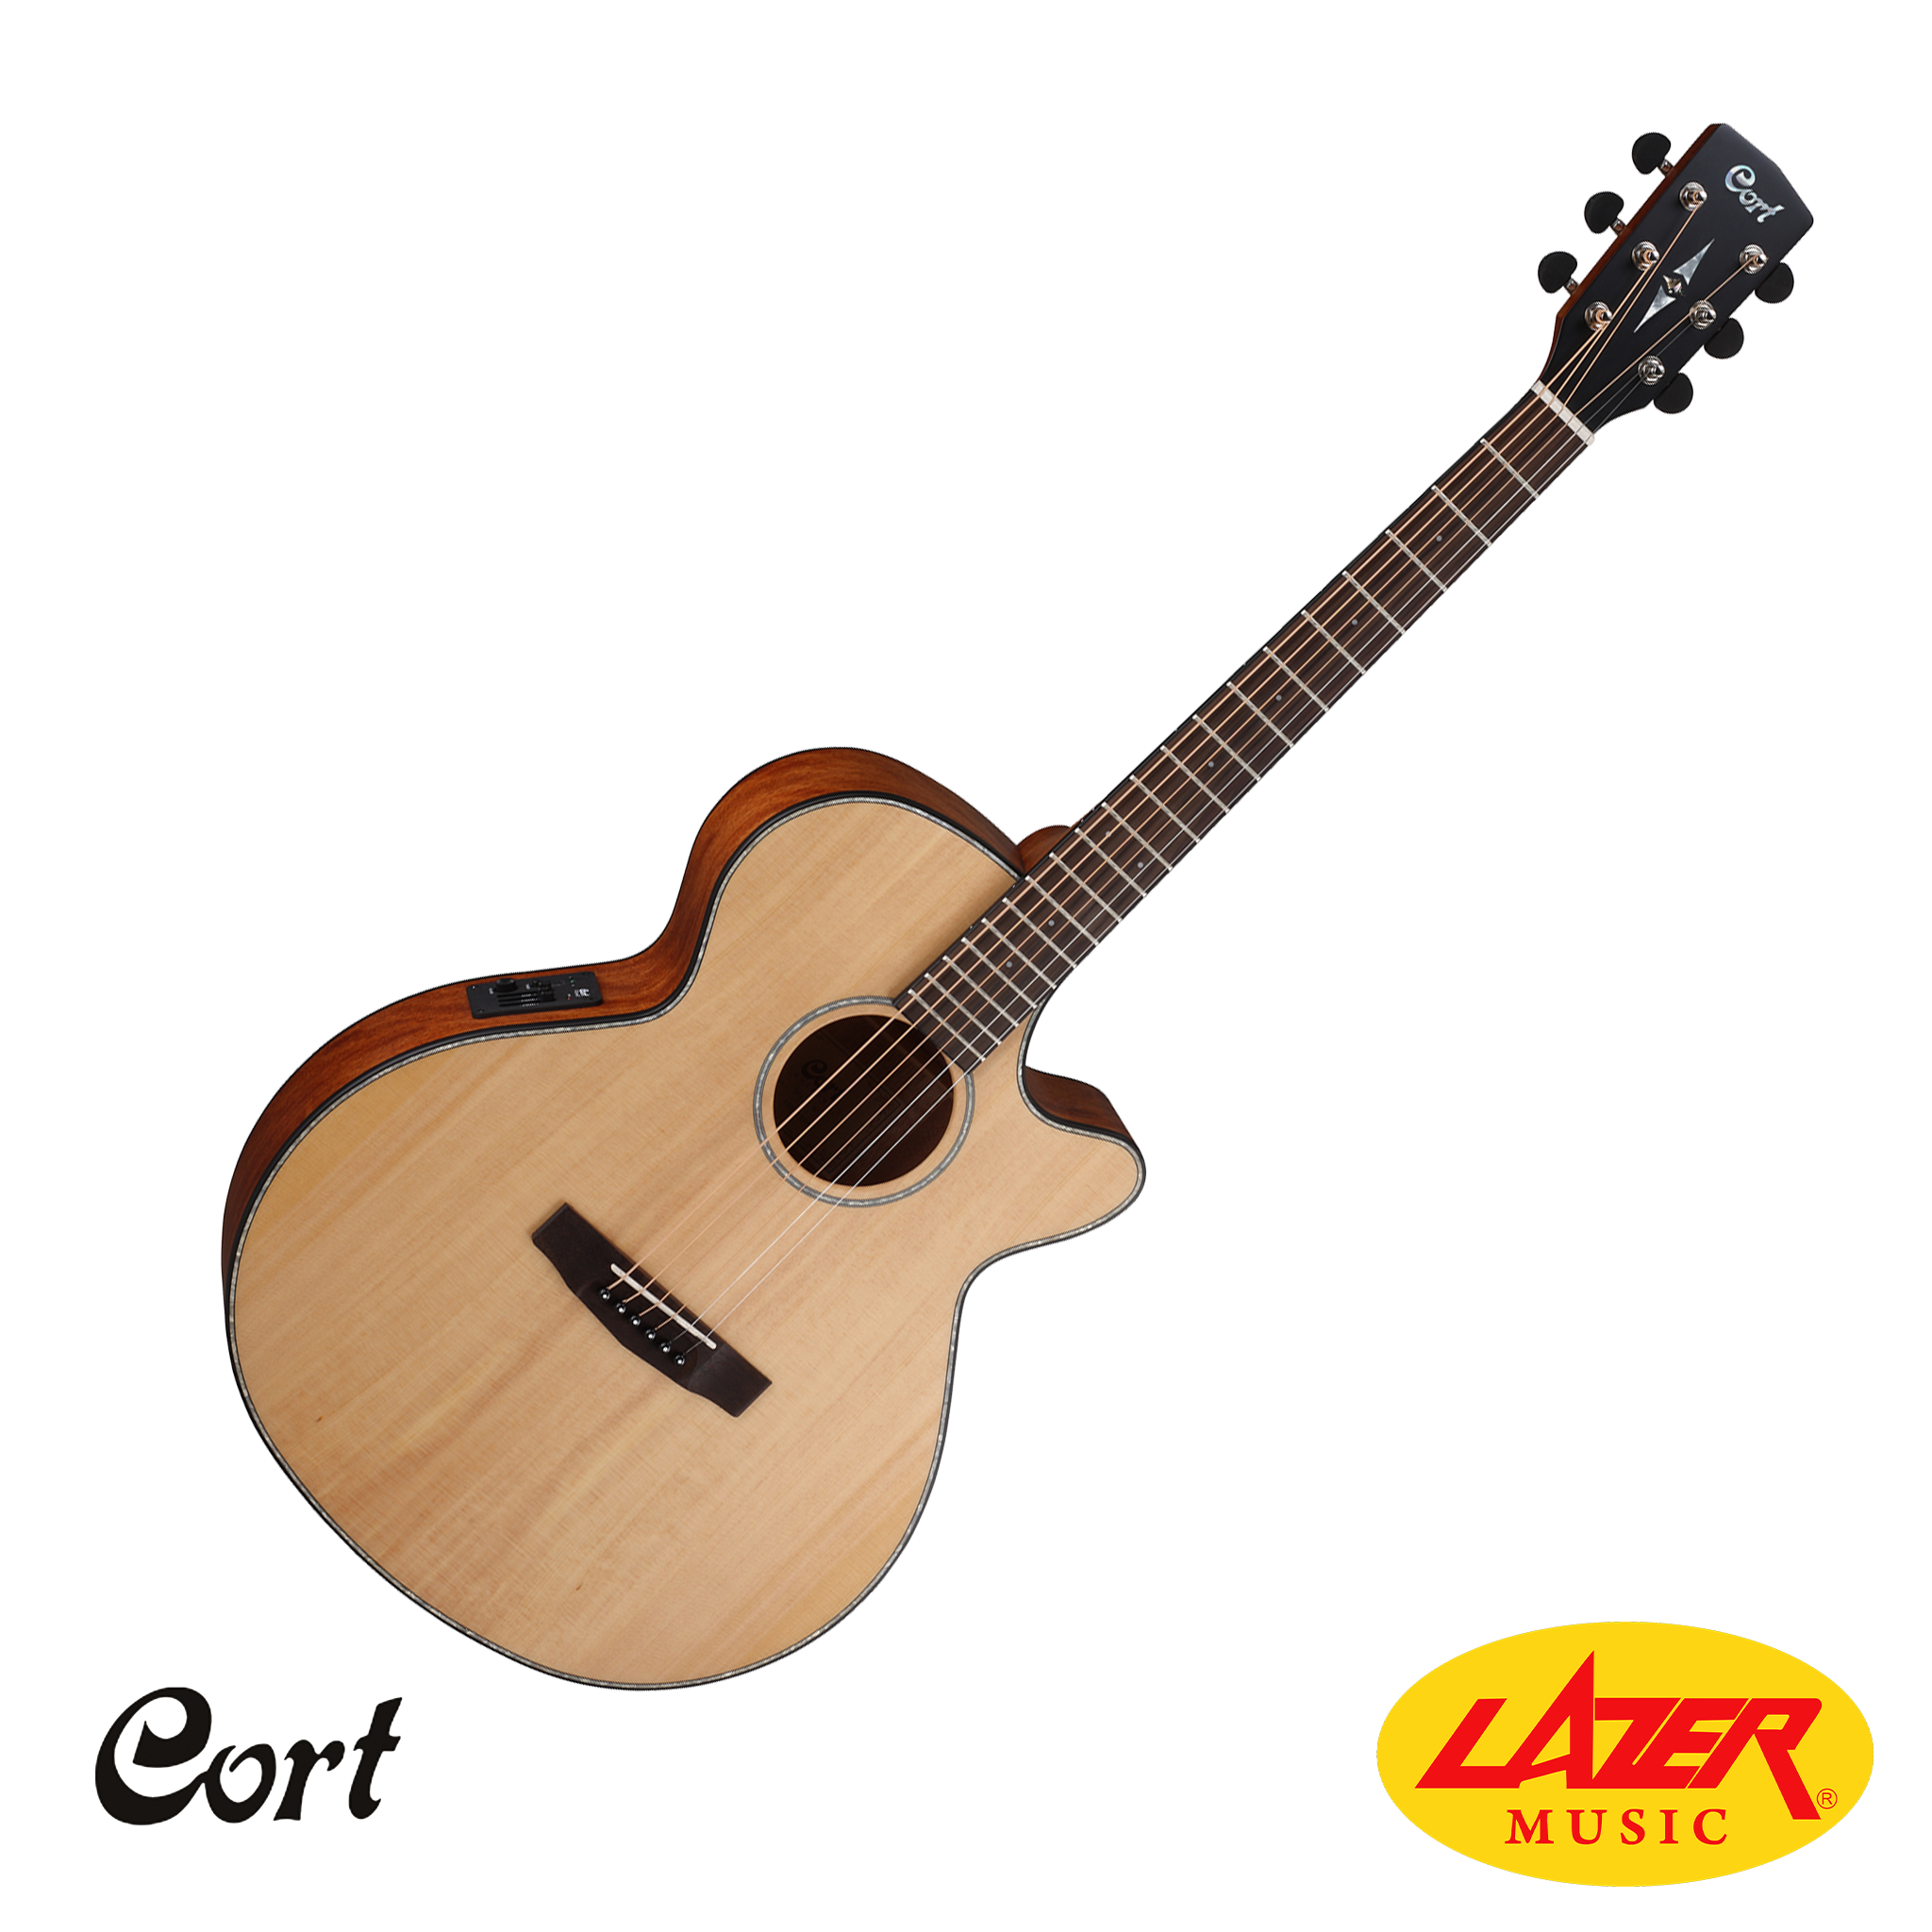 Cort SFX-MW All Myrtlewood Body, Mahogany Neck SFX Acoustic Guitar Wit